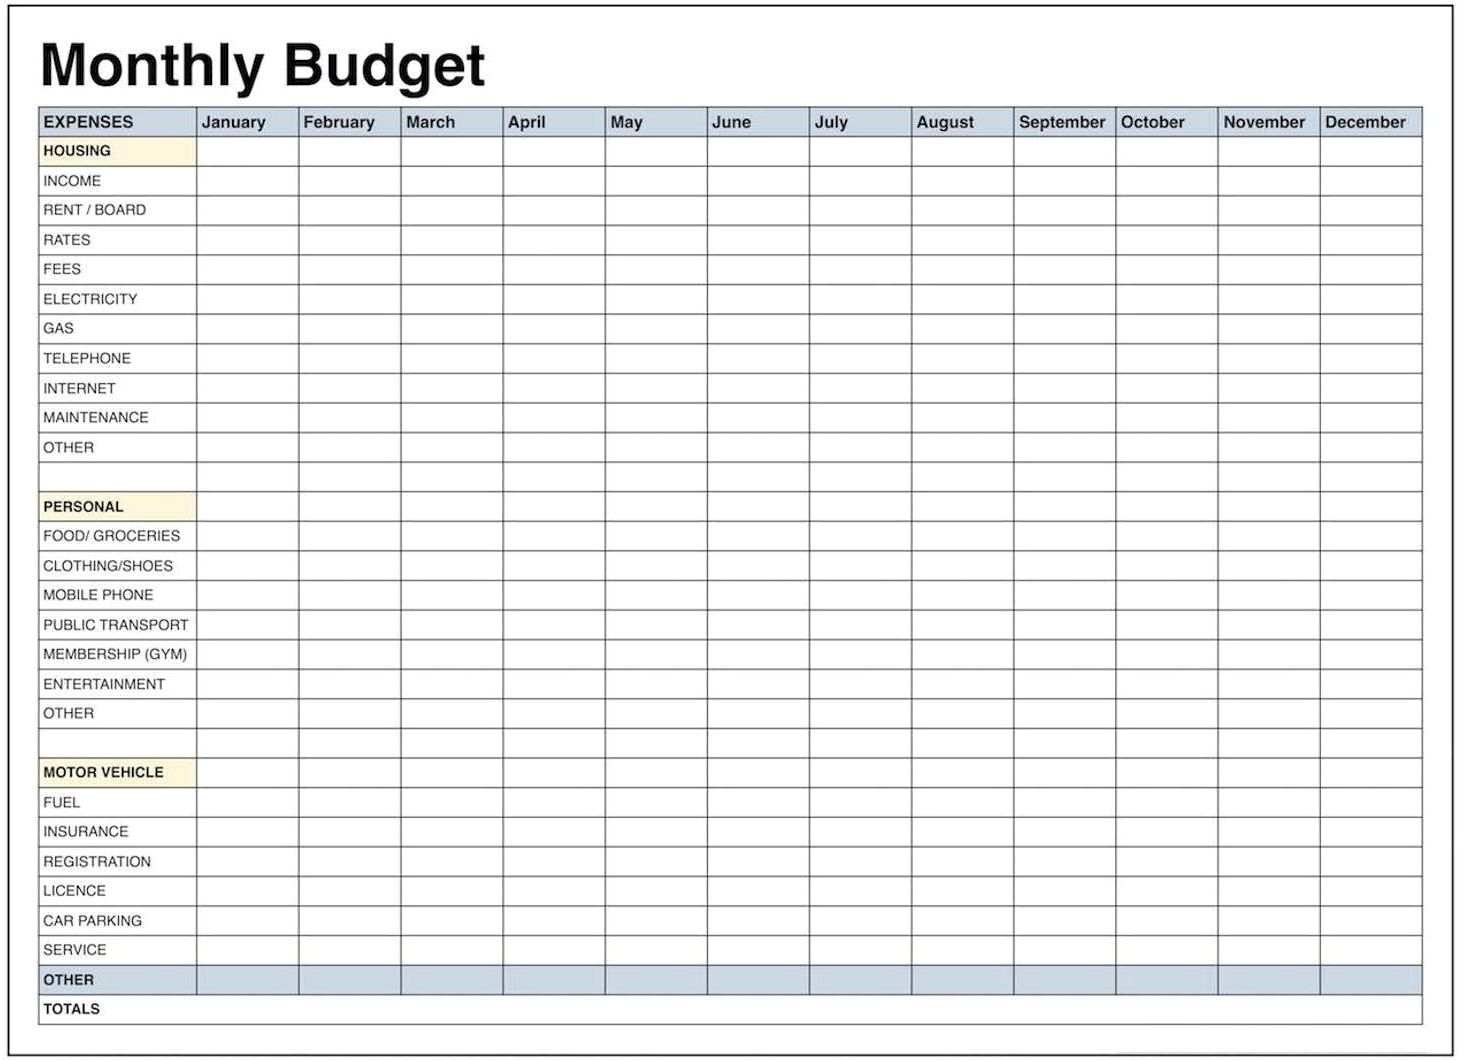 household budget categories